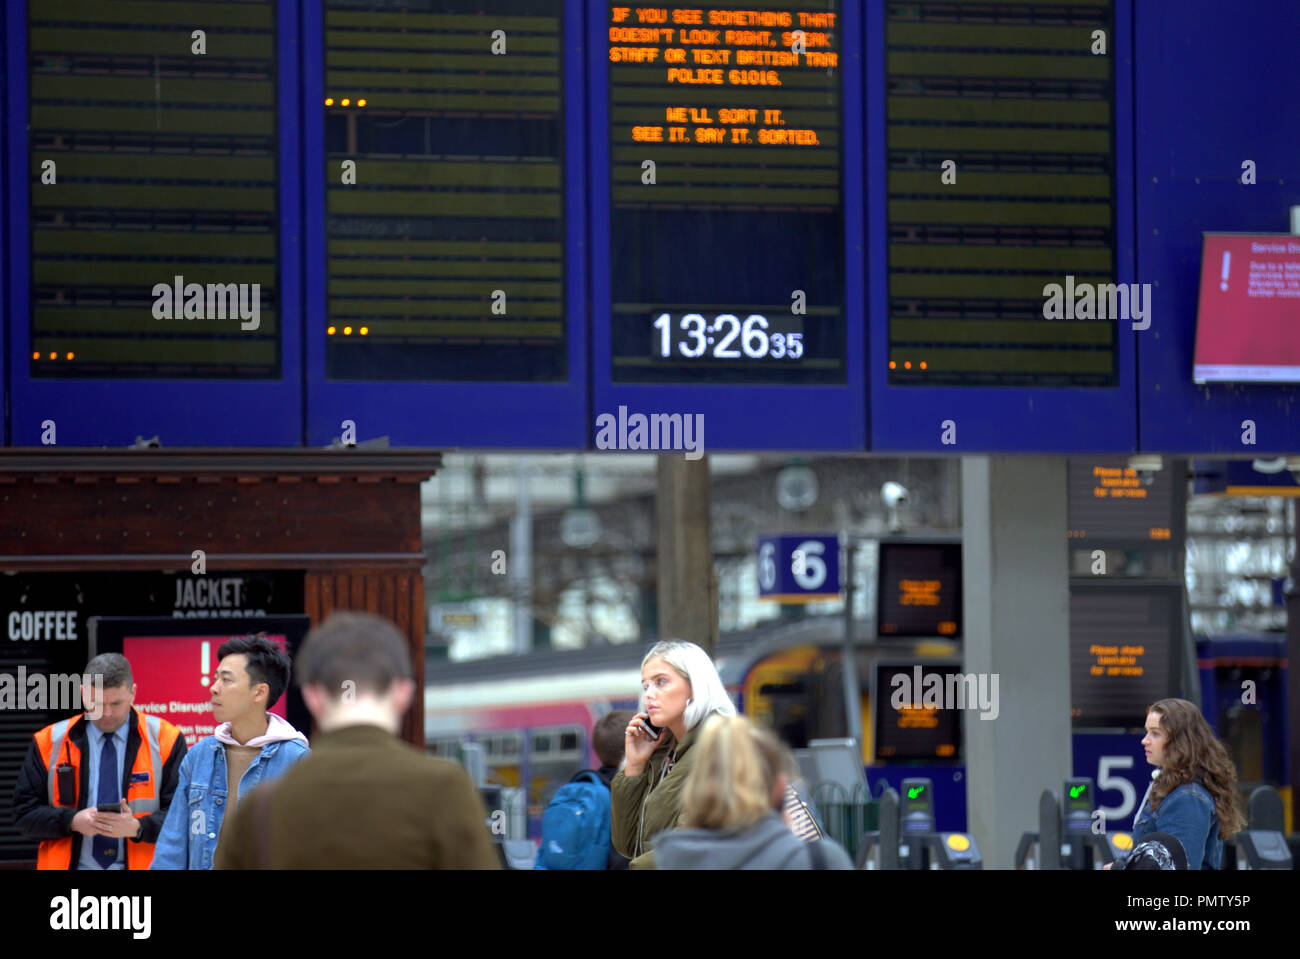 Glasgow, Scotland, UK, 19th September, 2018. UK Weather: Storm Ali appeared in the city overnight bringing wind and rain with an amber be prepared warning from the met office. Scotrail have canceled all trains from the main Glasgow stations, Central station is pictured with its empty travel boards and irate passengers, and are advising travellers to find alternative transport stating train tickets are valid on firstbus. Gerard Ferry/Alamy news Stock Photo